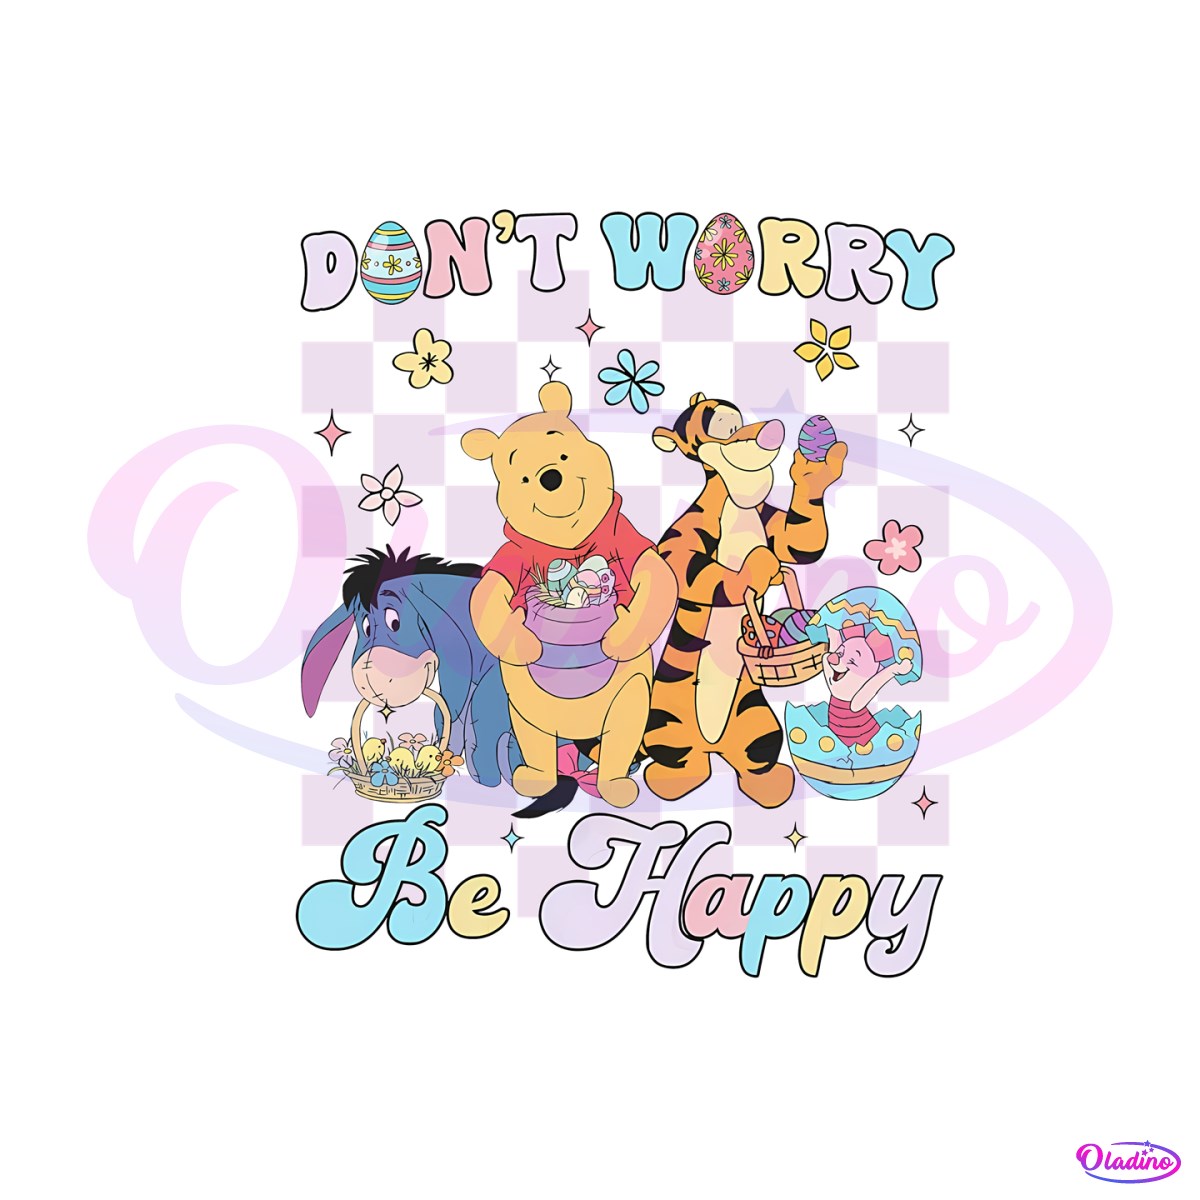 pooh-and-friends-dont-worry-be-happy-png